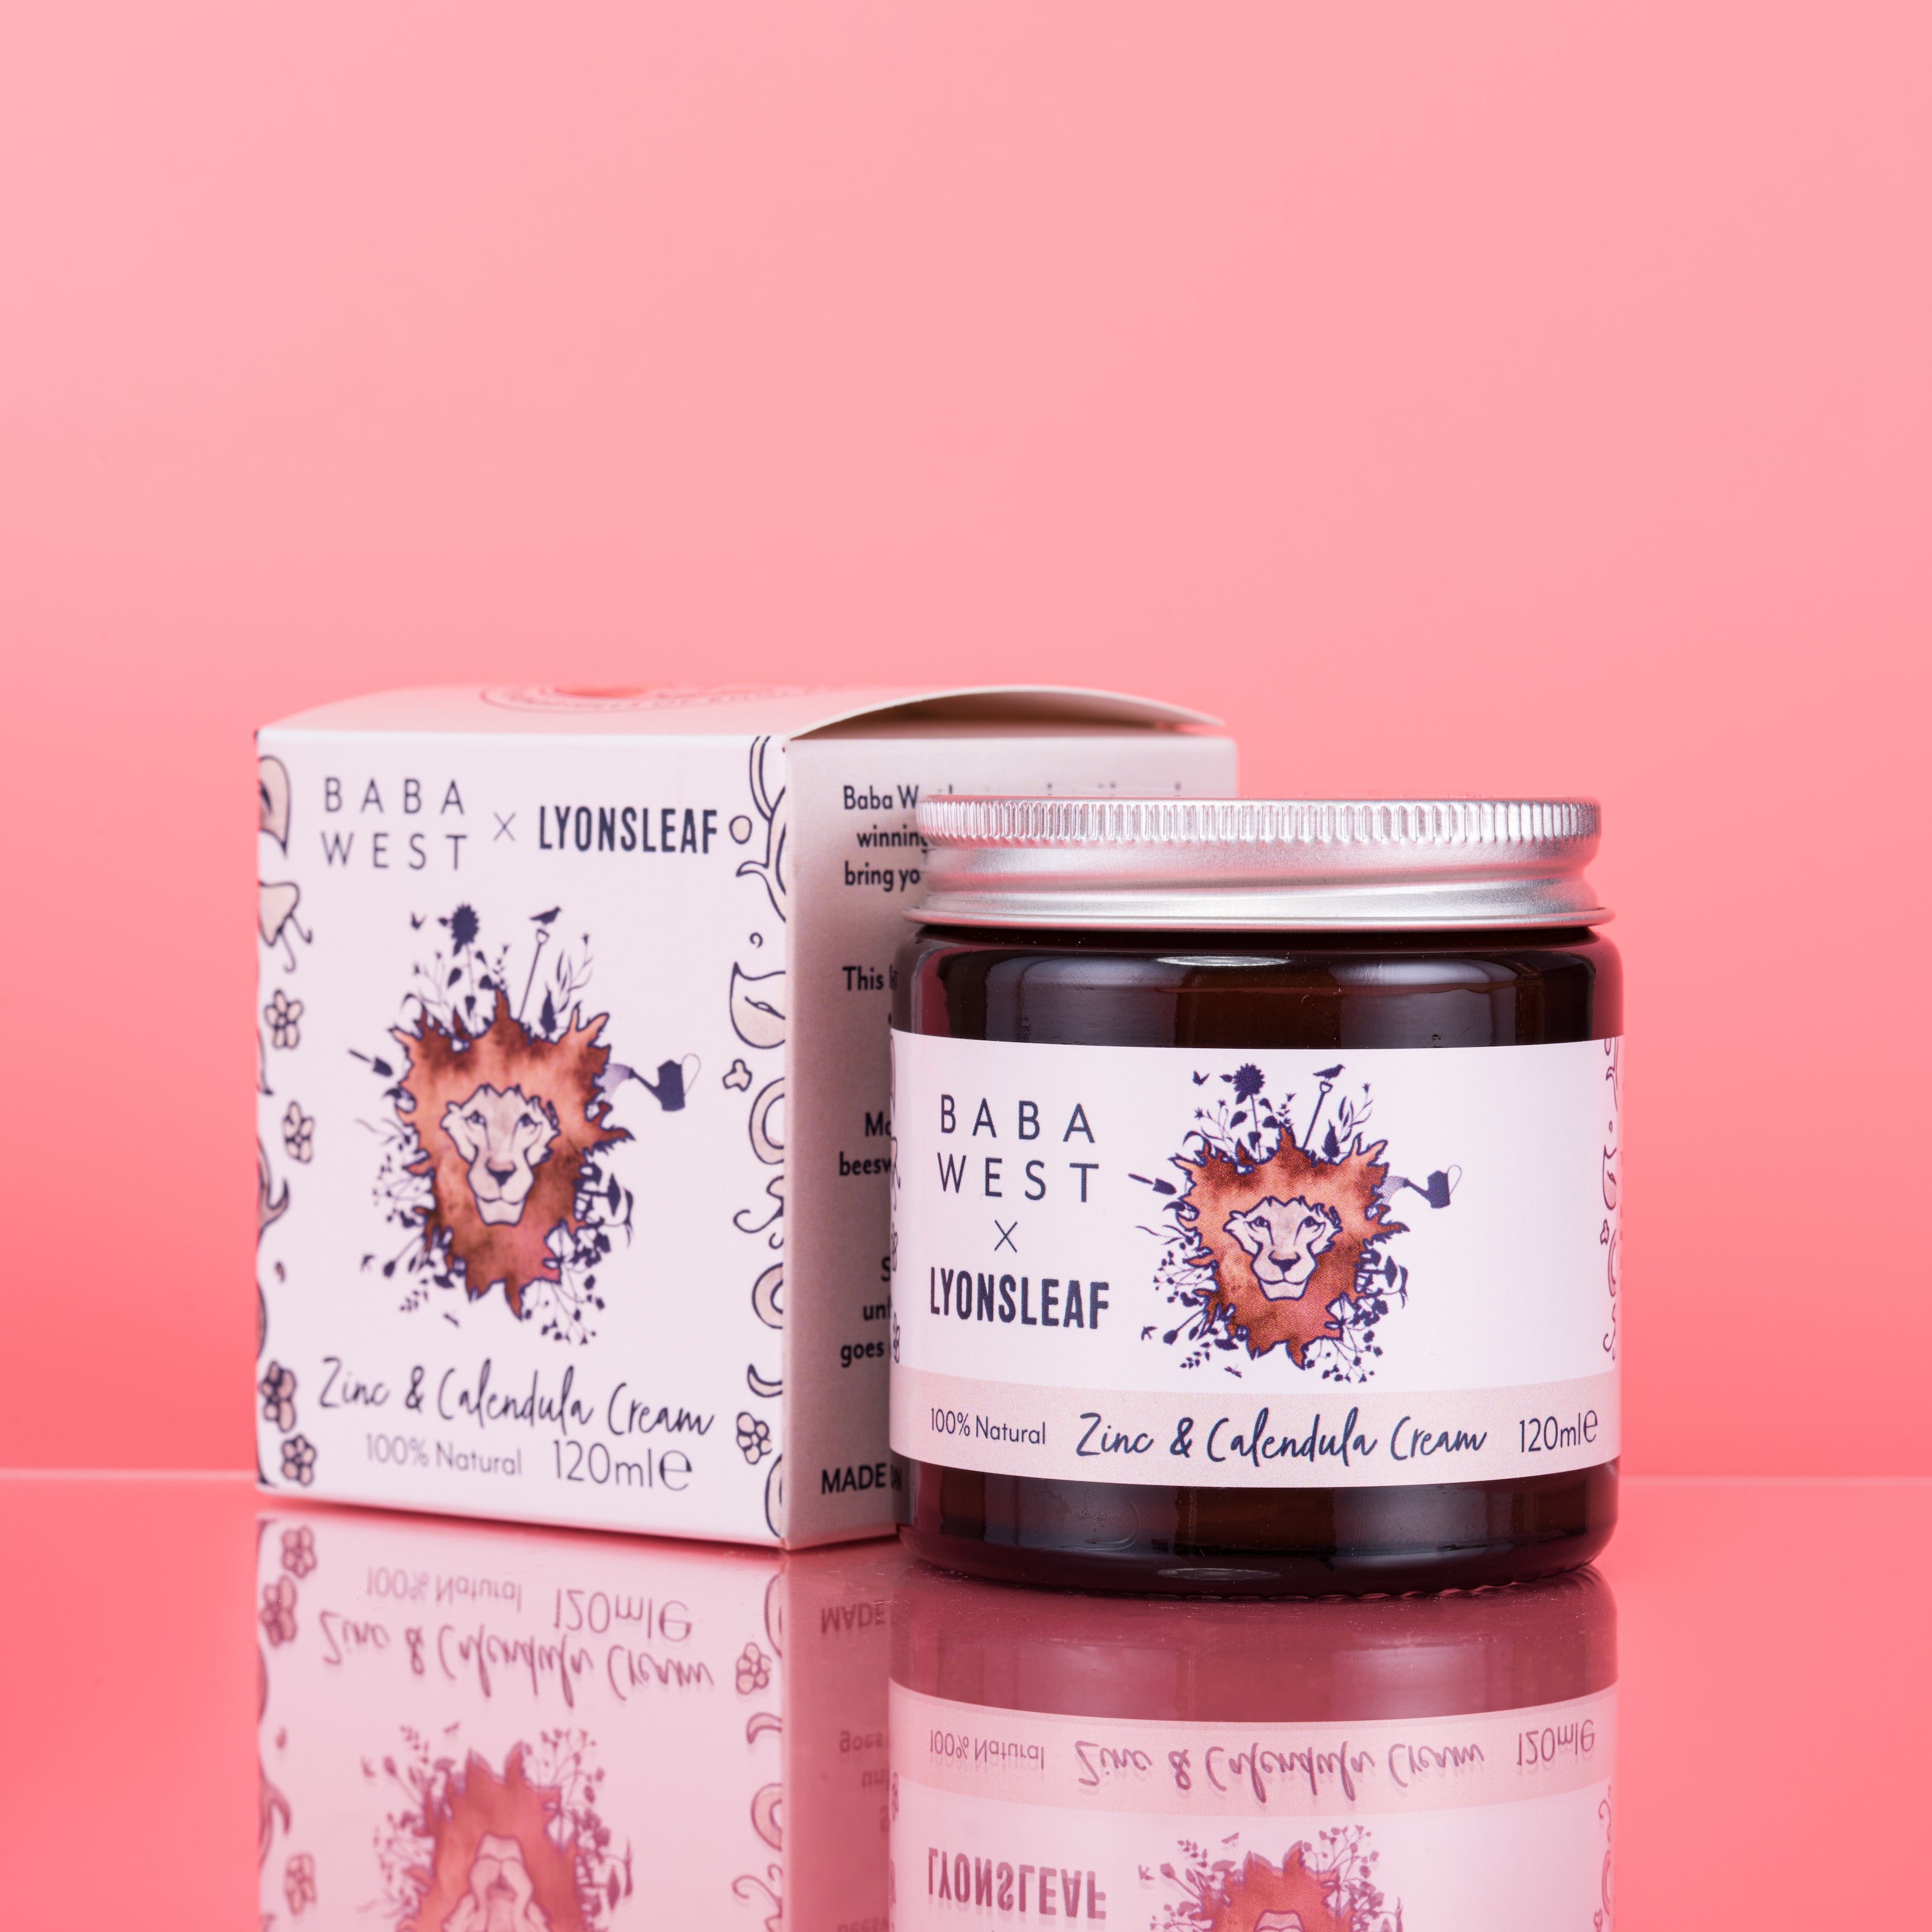 Baba West x Lyonsleaf Zinc & Calendula Cream: The Perfect Addition To Any First Aid Kit